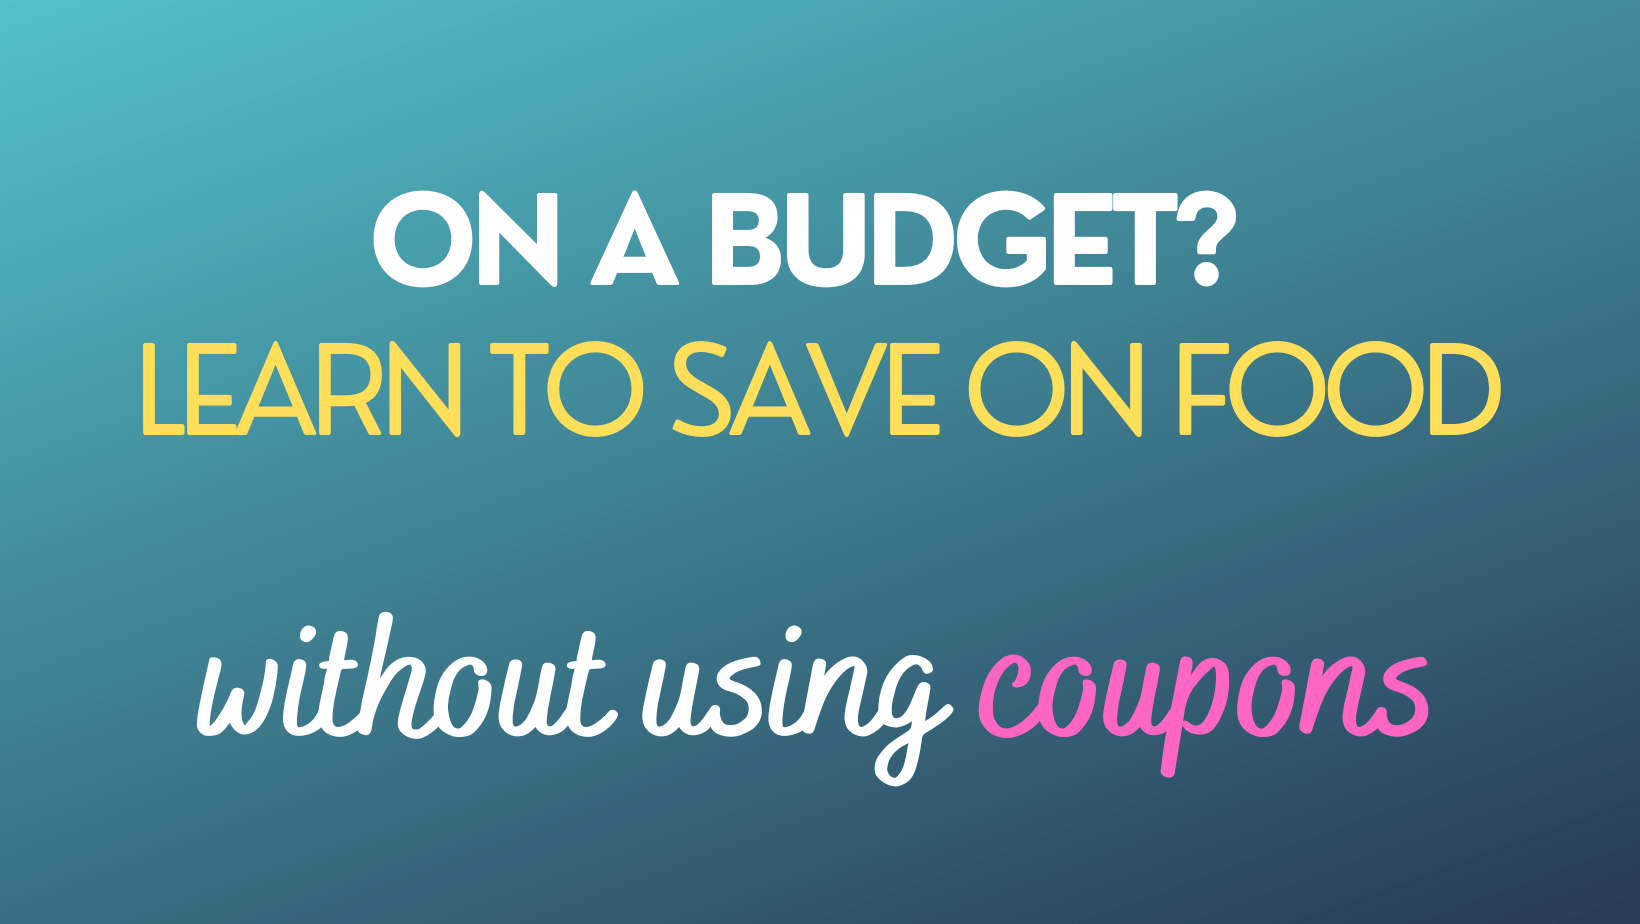 As a young adult, you may be on a tight budget. But that doesn’t mean you have to eat ramen noodles every night! There are plenty of creative ways to save money on food and groceries without having to clip coupons. Because let’s face it: ain’t nobody got time for that! Learn more here: >>> https://askmamaj.com/save-money-food/ Pin for later: >>> https://www.pinterest.com/pin/133278470216440182 #savemoney #savemoneyonfood #grocerytips #shoppingtips #savingmoneytips #adulting #youngadults #askmamaj